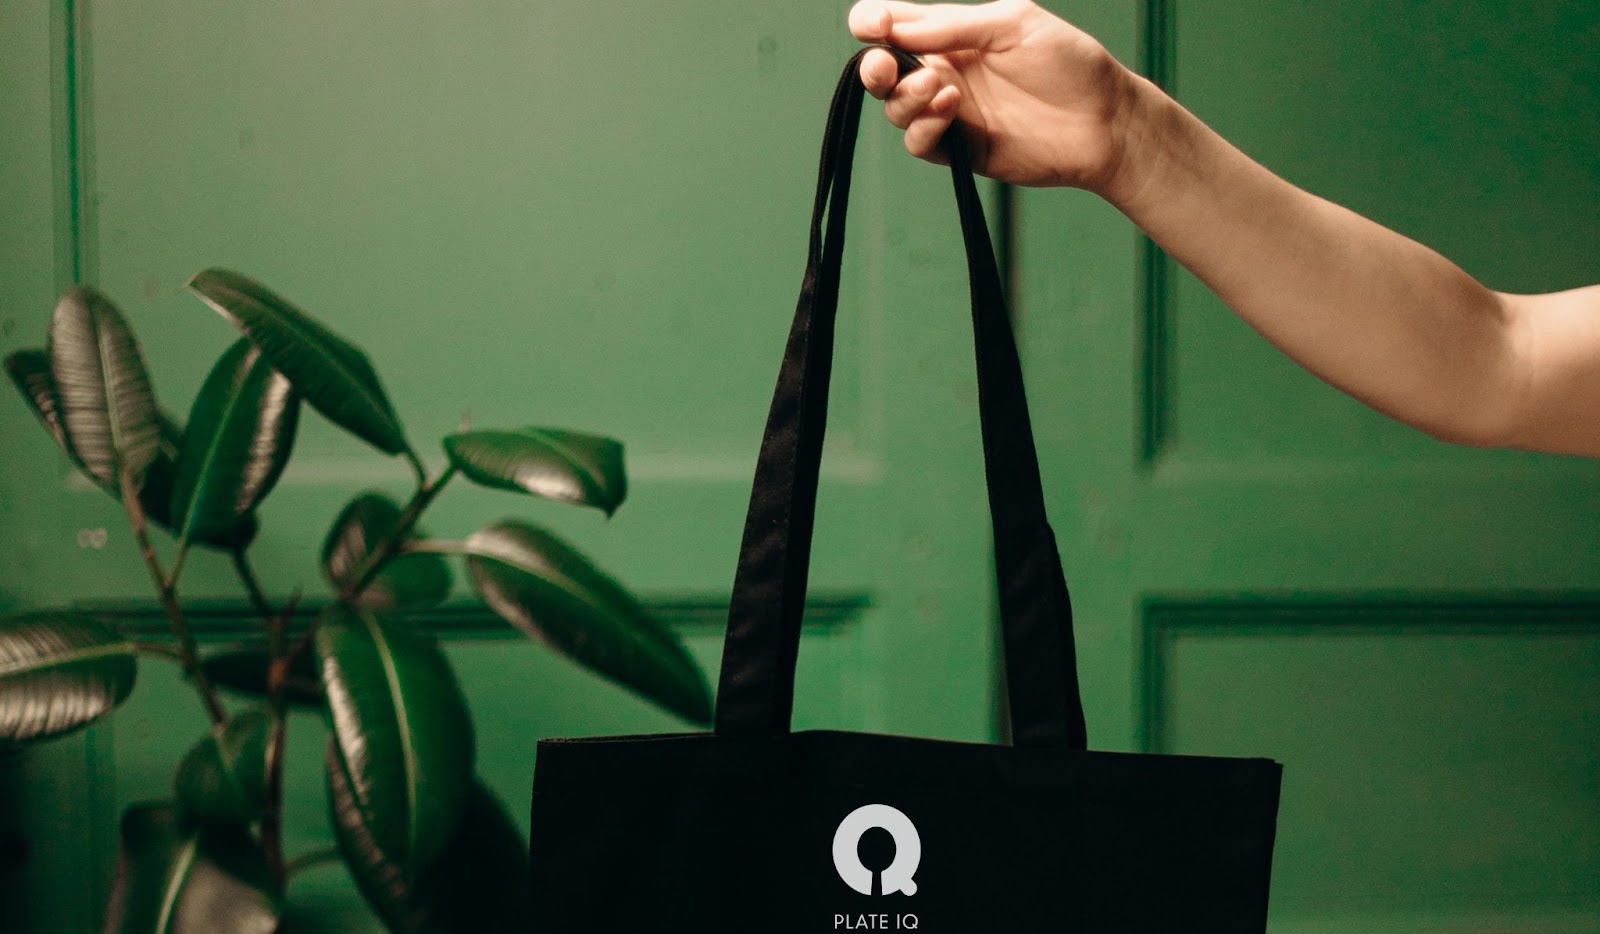 If you went to the 2022 National Restaurant Association Show, you likely brought home more than a fat bag of SWAG merchandise and tasty samples. Picture shows an arm holding a black cloth Plate IQ bag, and a sumptuous green plant in the background.